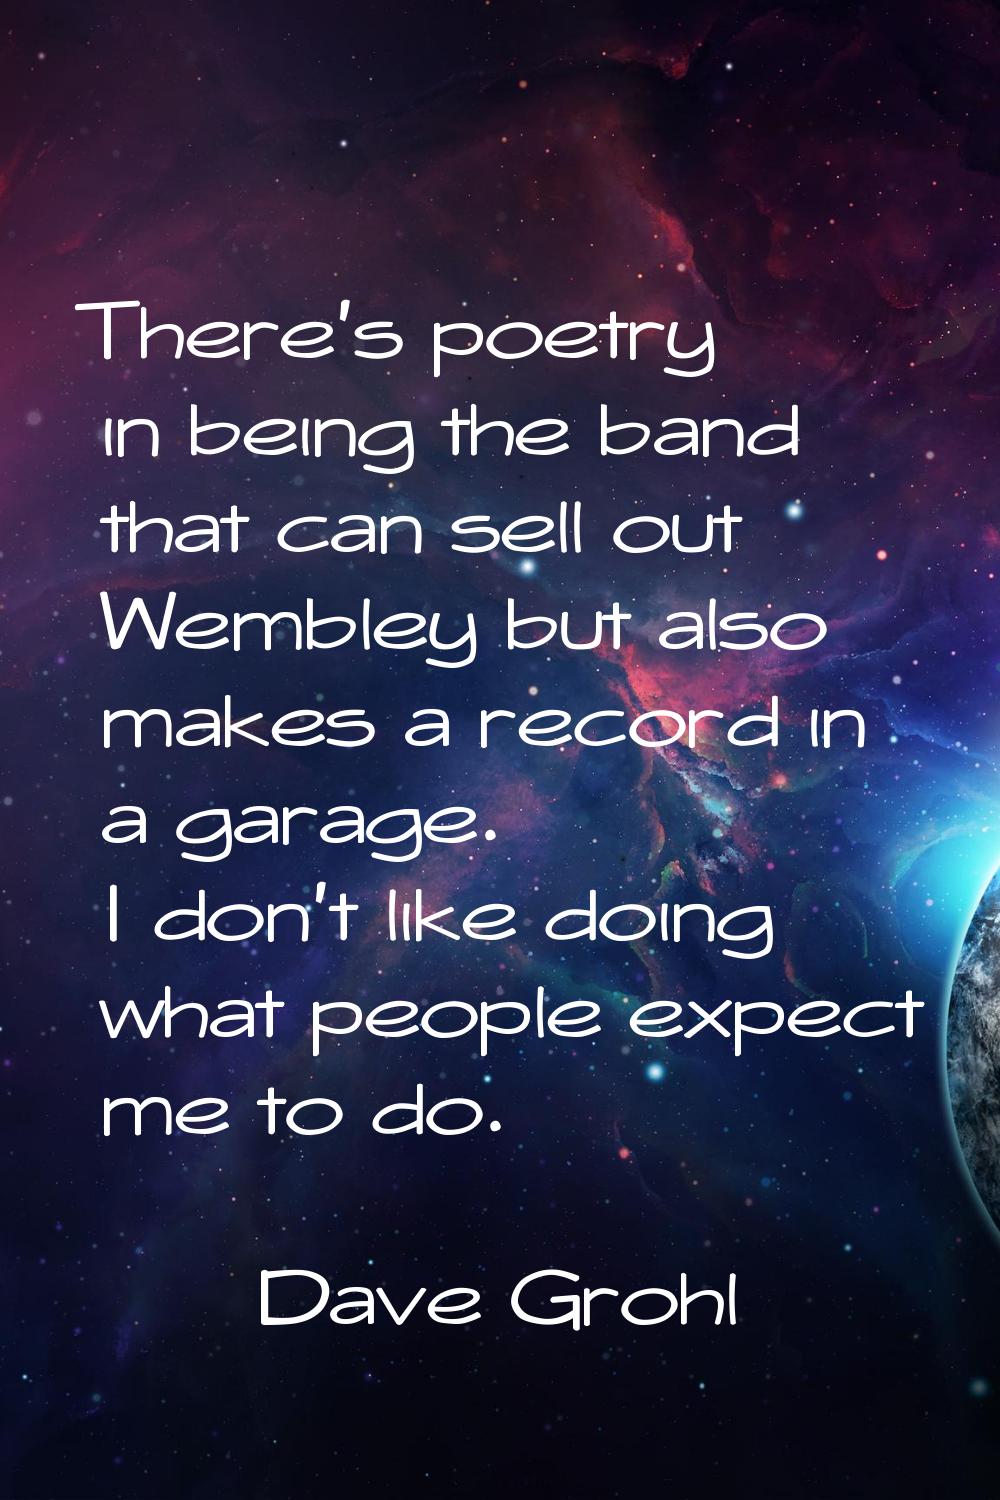 There's poetry in being the band that can sell out Wembley but also makes a record in a garage. I d